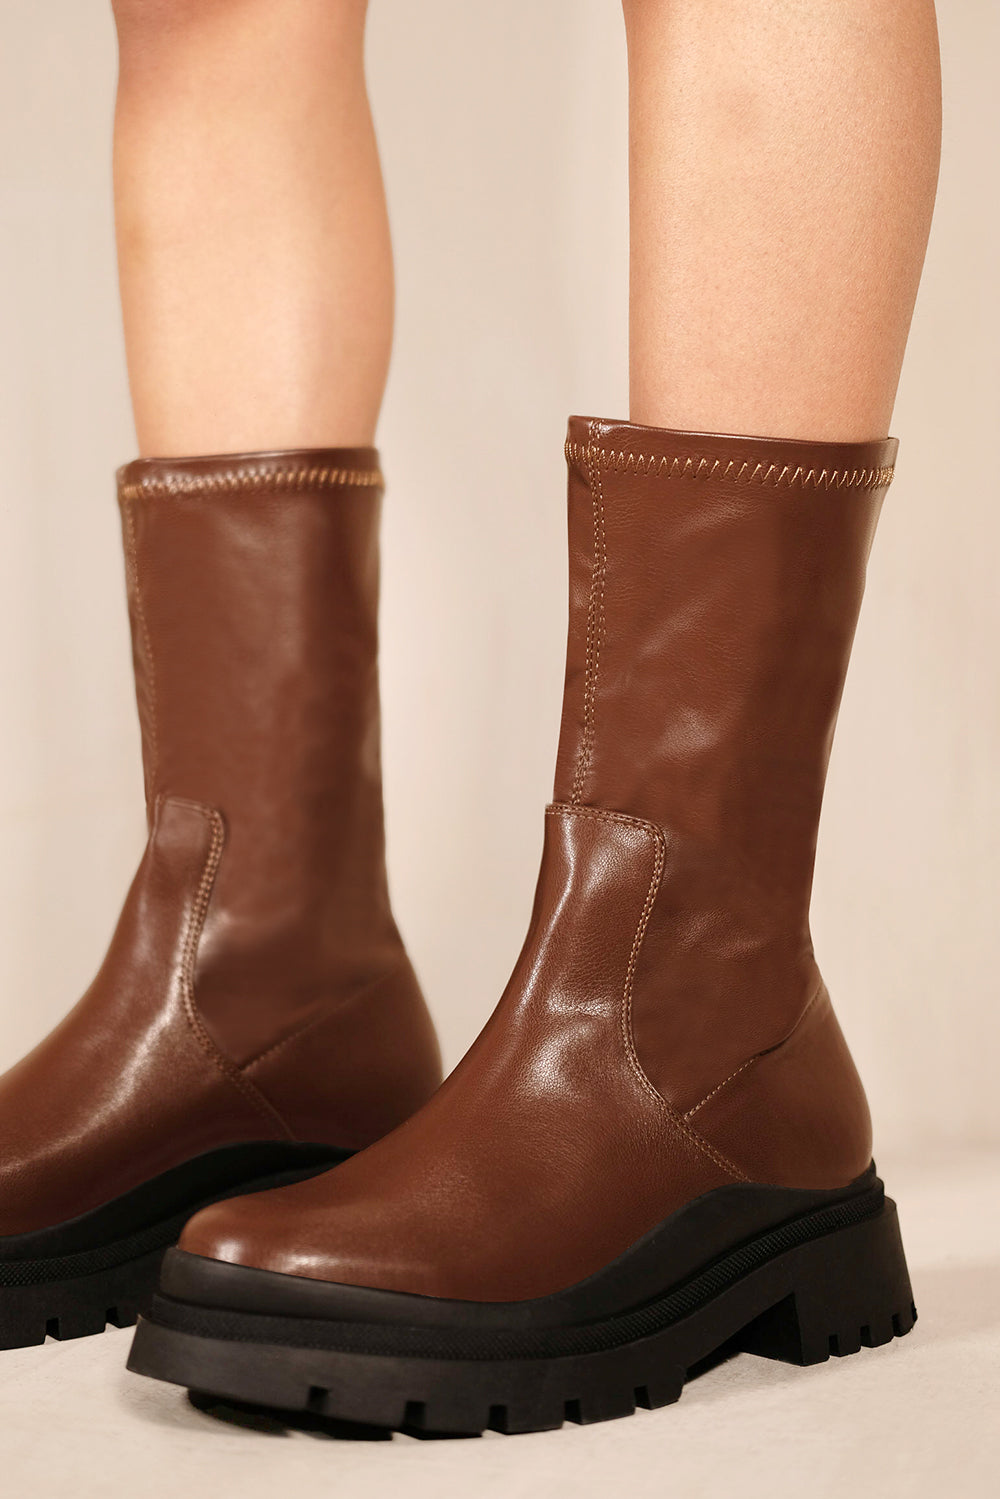 HOLLIE PU ANKLE BOOT WITH CHUNKY HEEL IN CHOCOLATE BROWN FAUX LEATHER